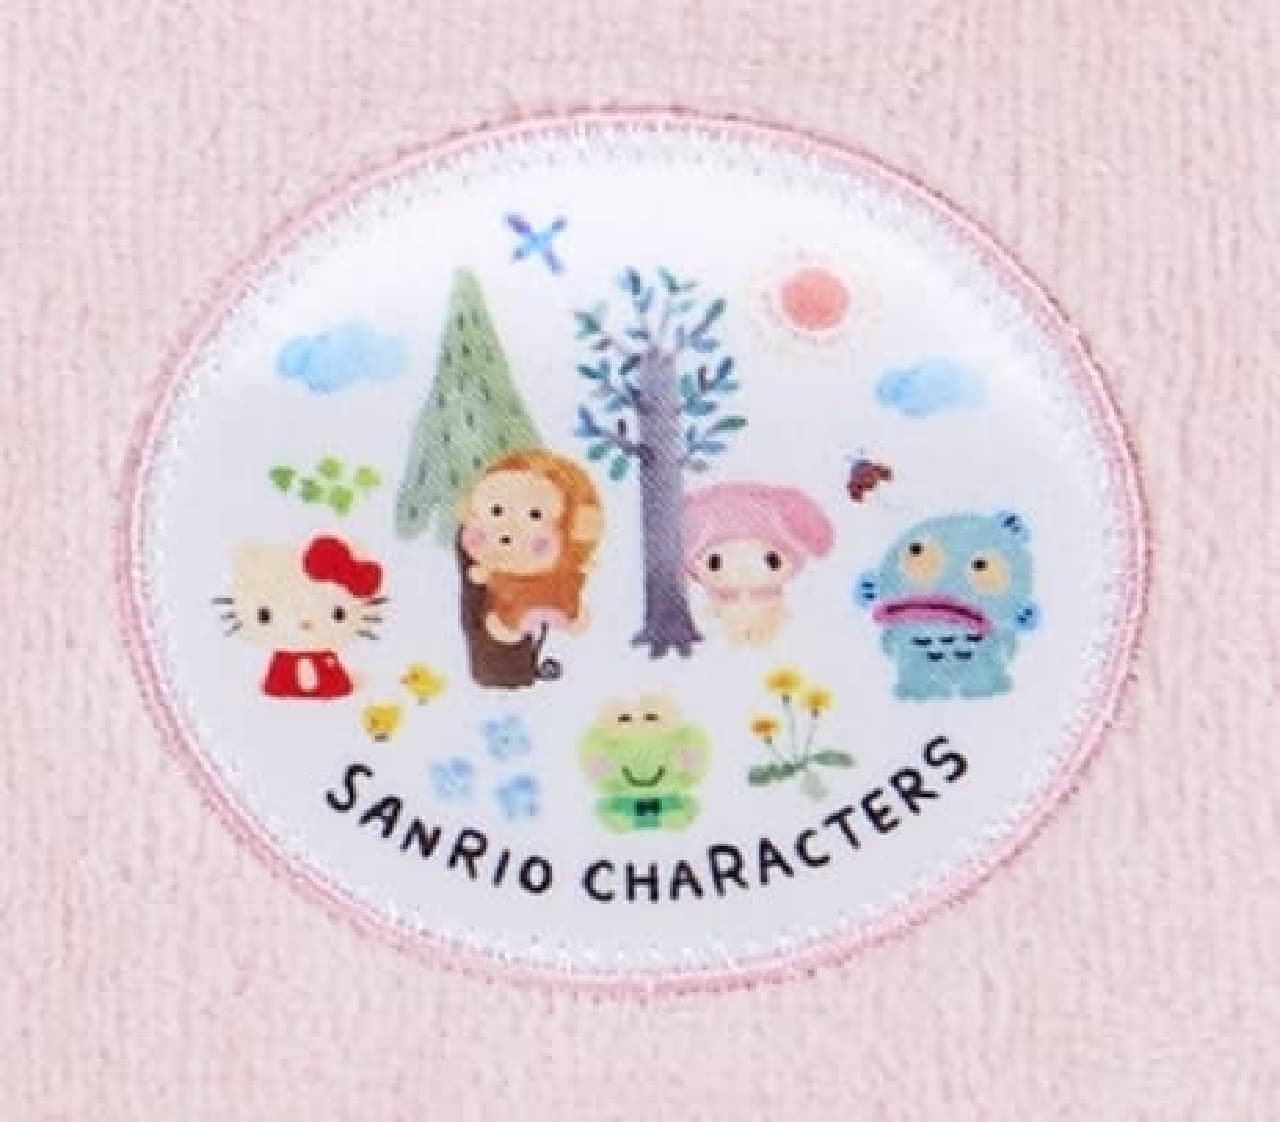 Post Office Sanrio Characters Goods 